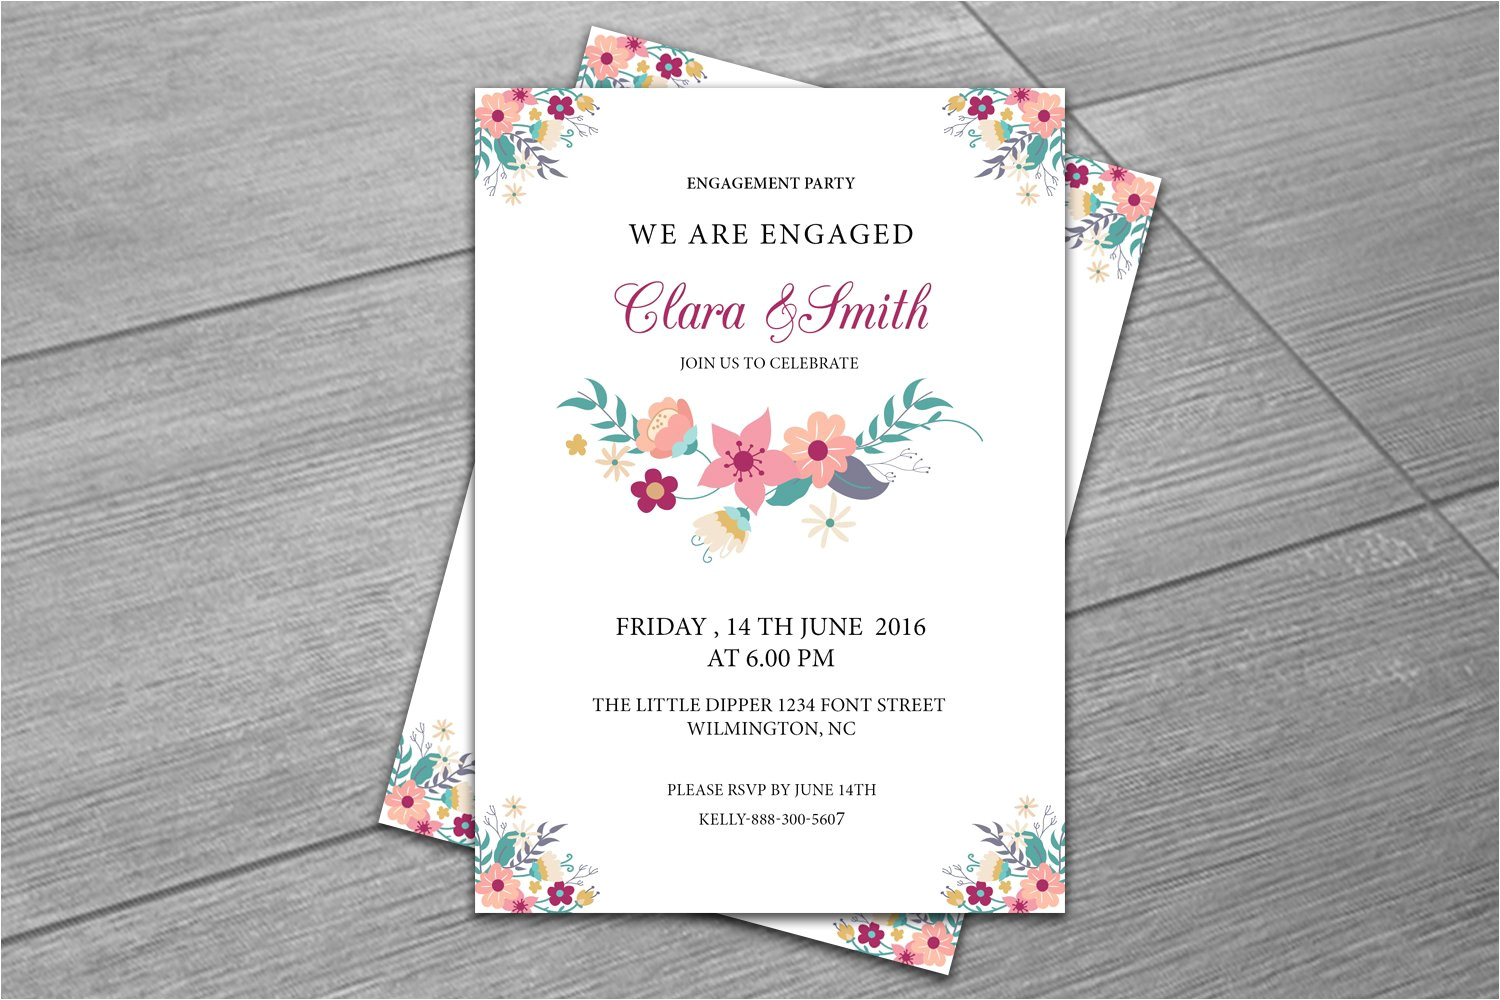 749752 engagement party invitation template